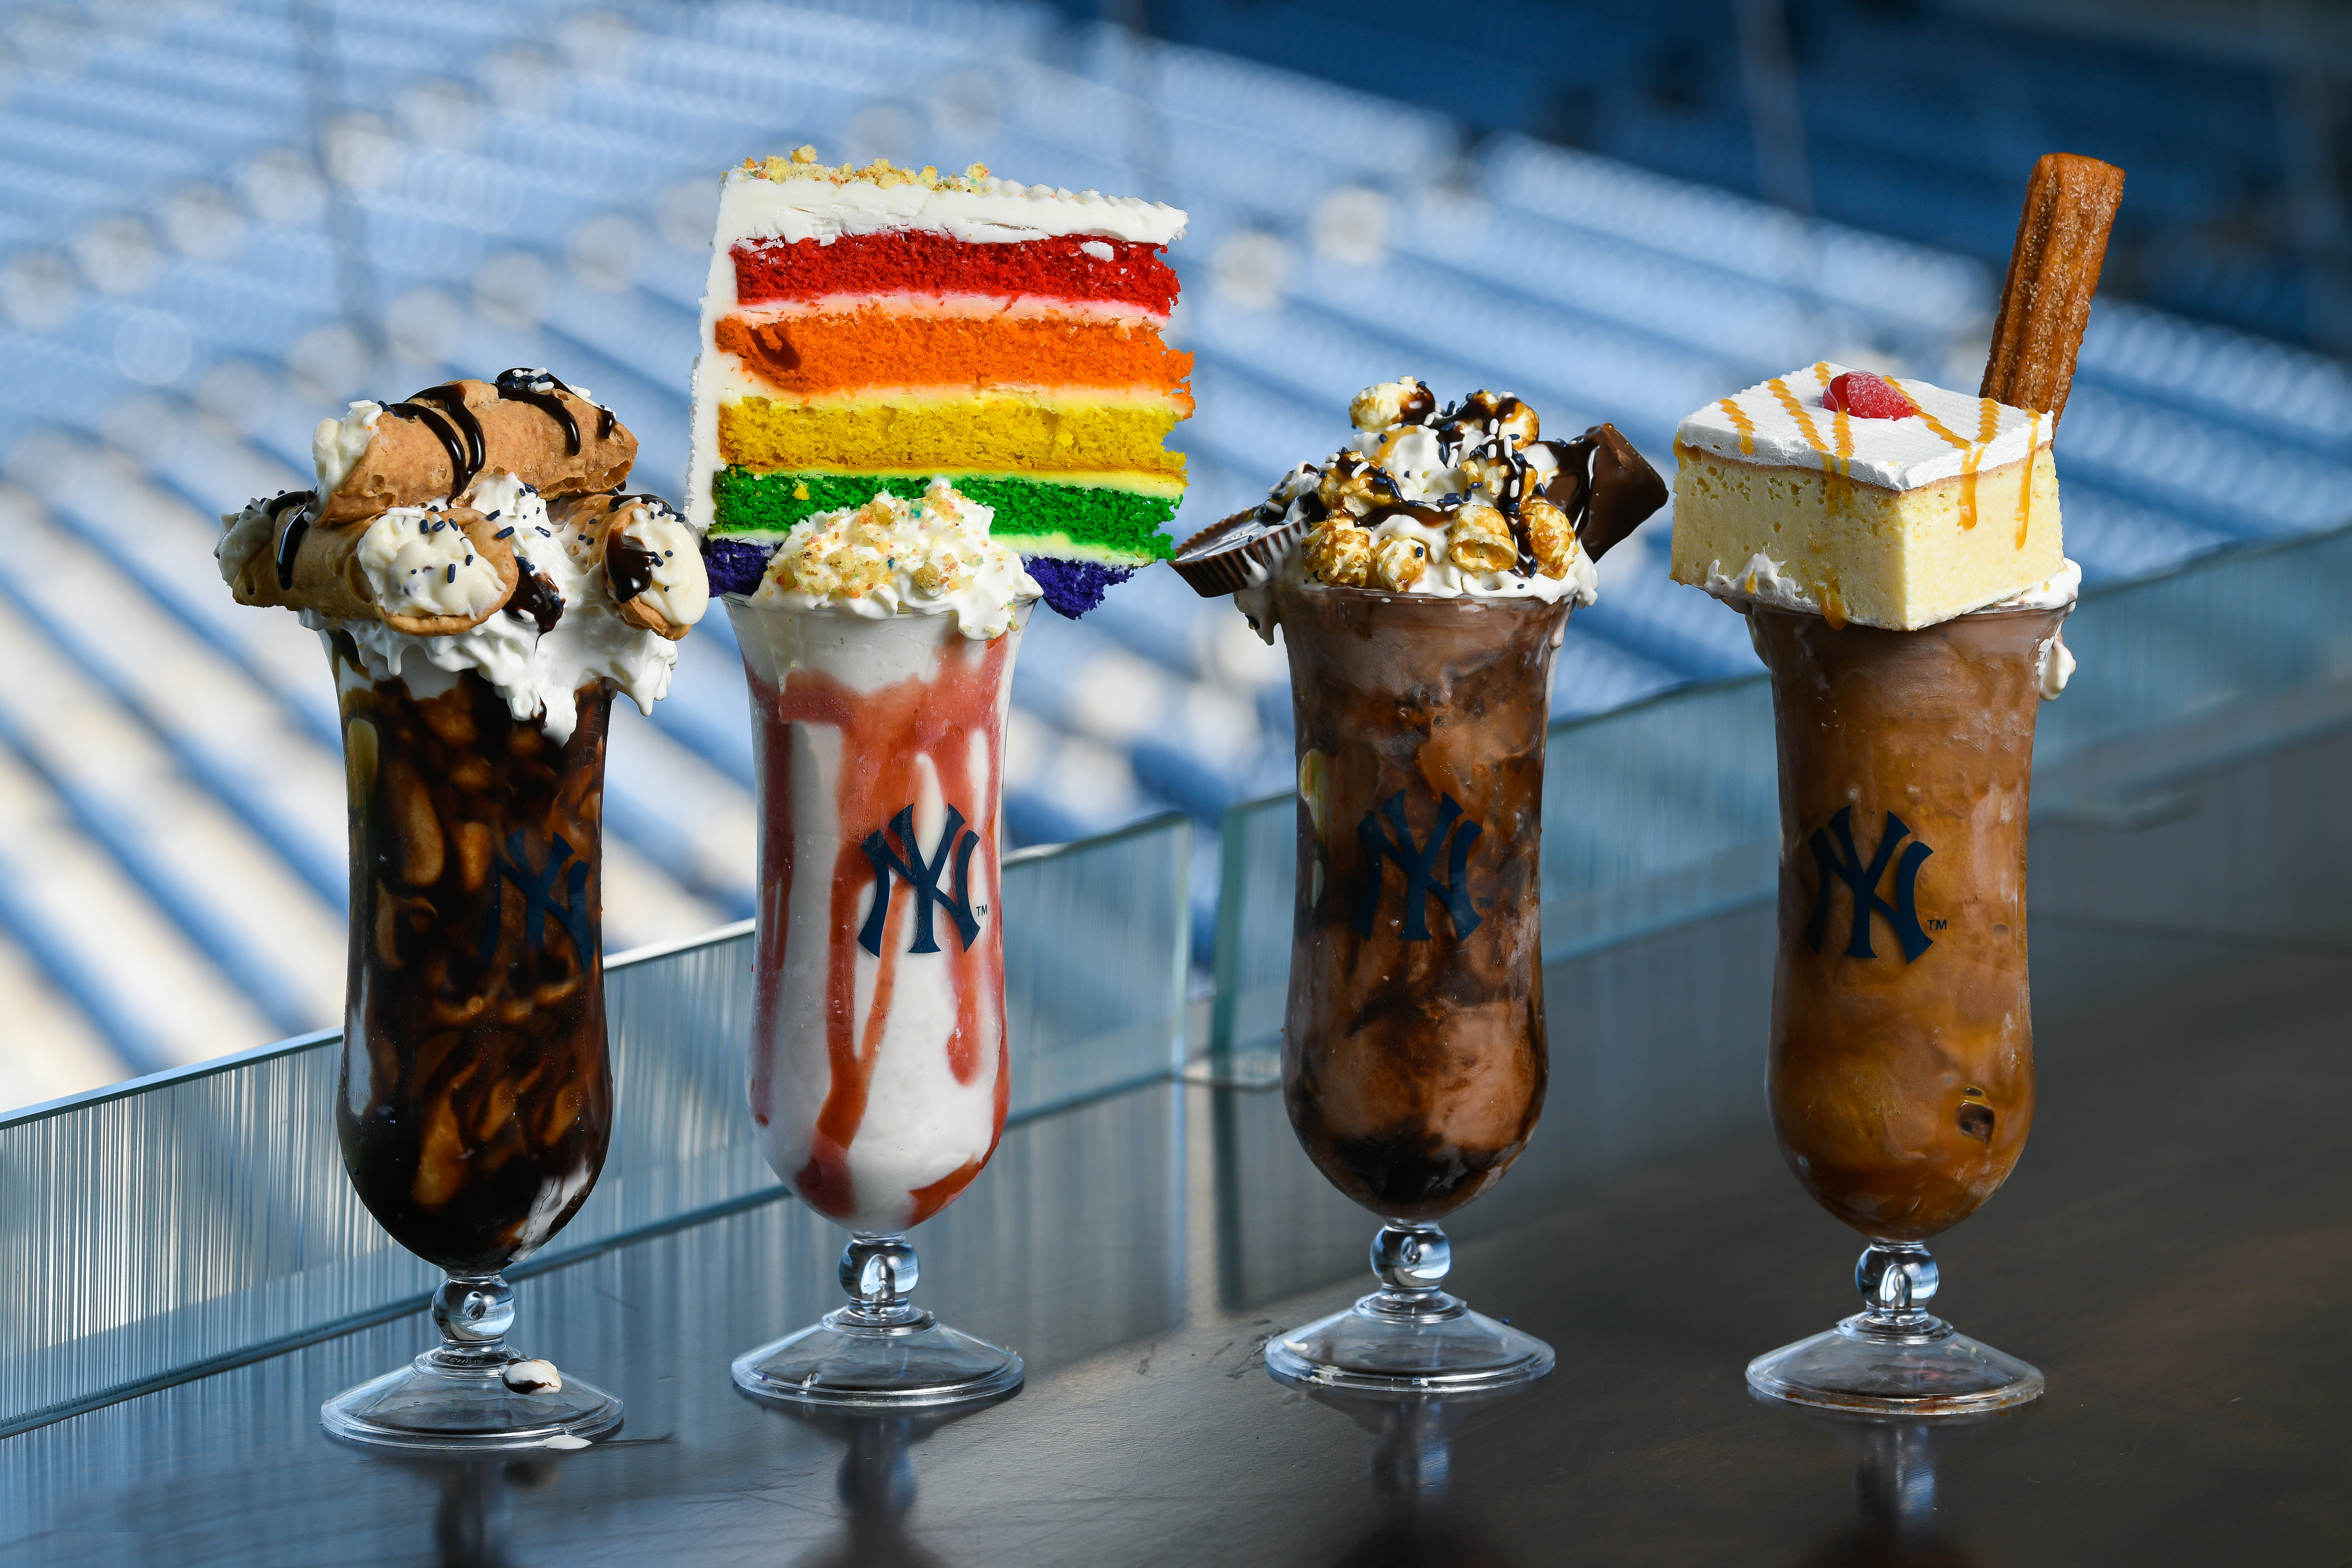 The Top 9 New Foods Available at Yankee Stadium This Season